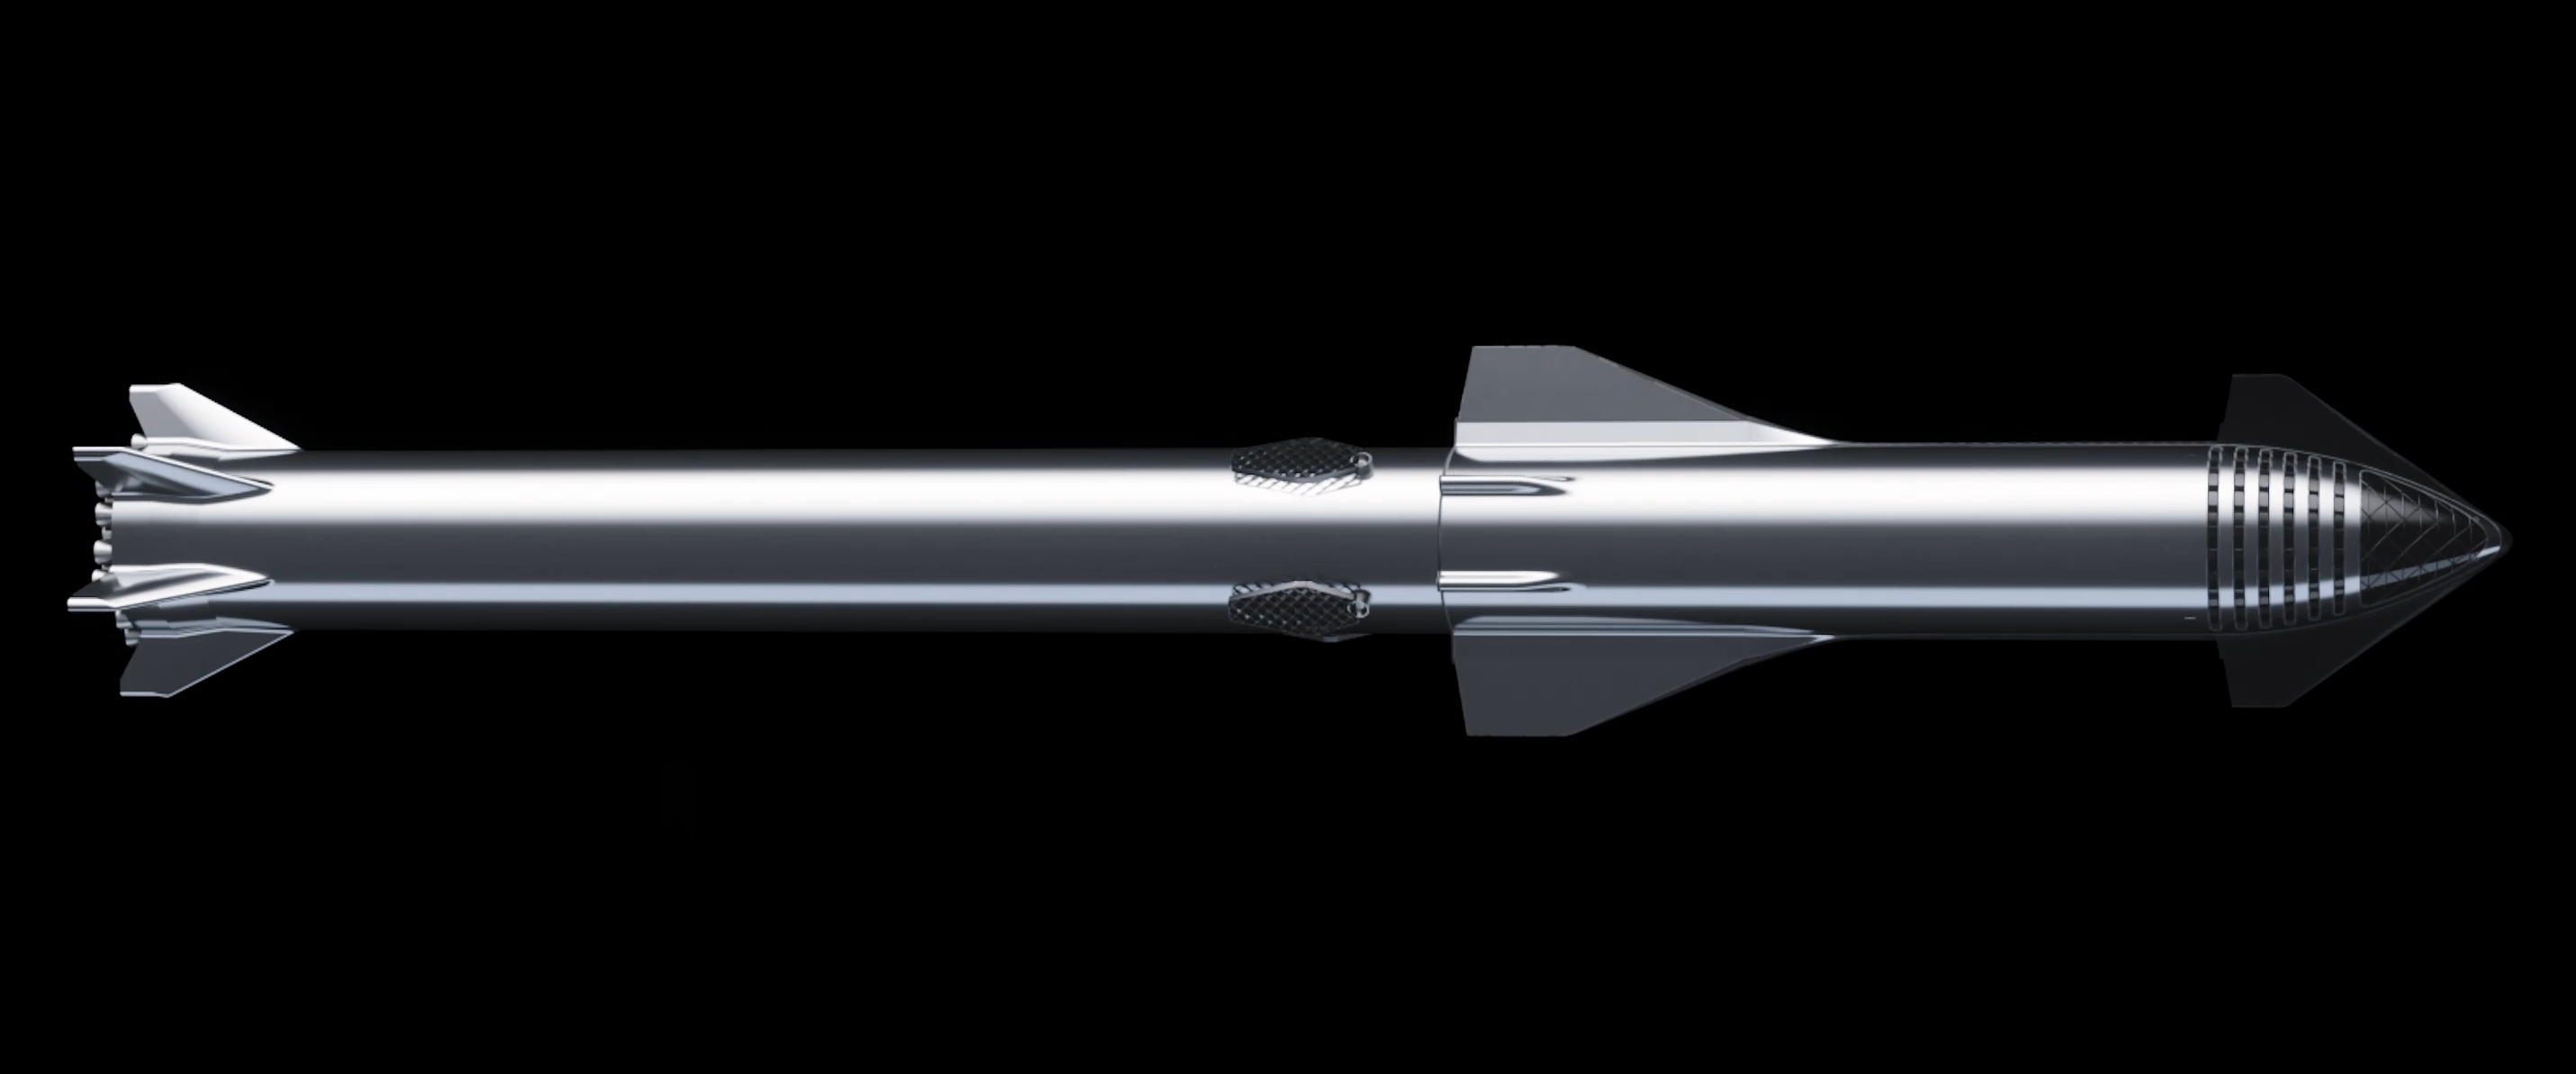 Starship Super Heavy 2019 (SpaceX) overview 1